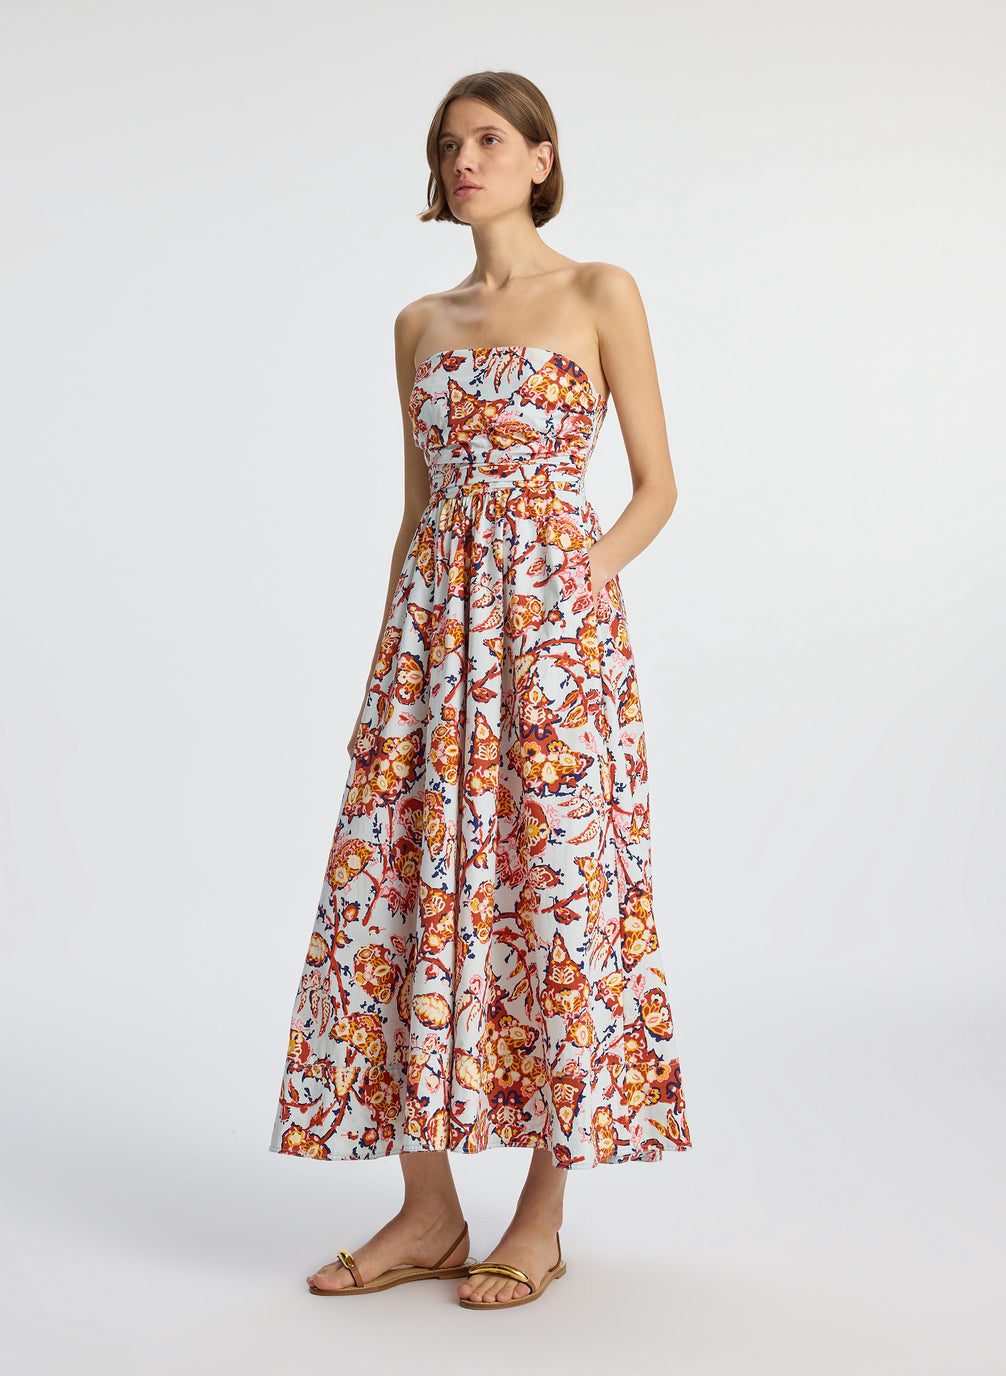 side view of woman wearing multicolor printed strapless midi dress